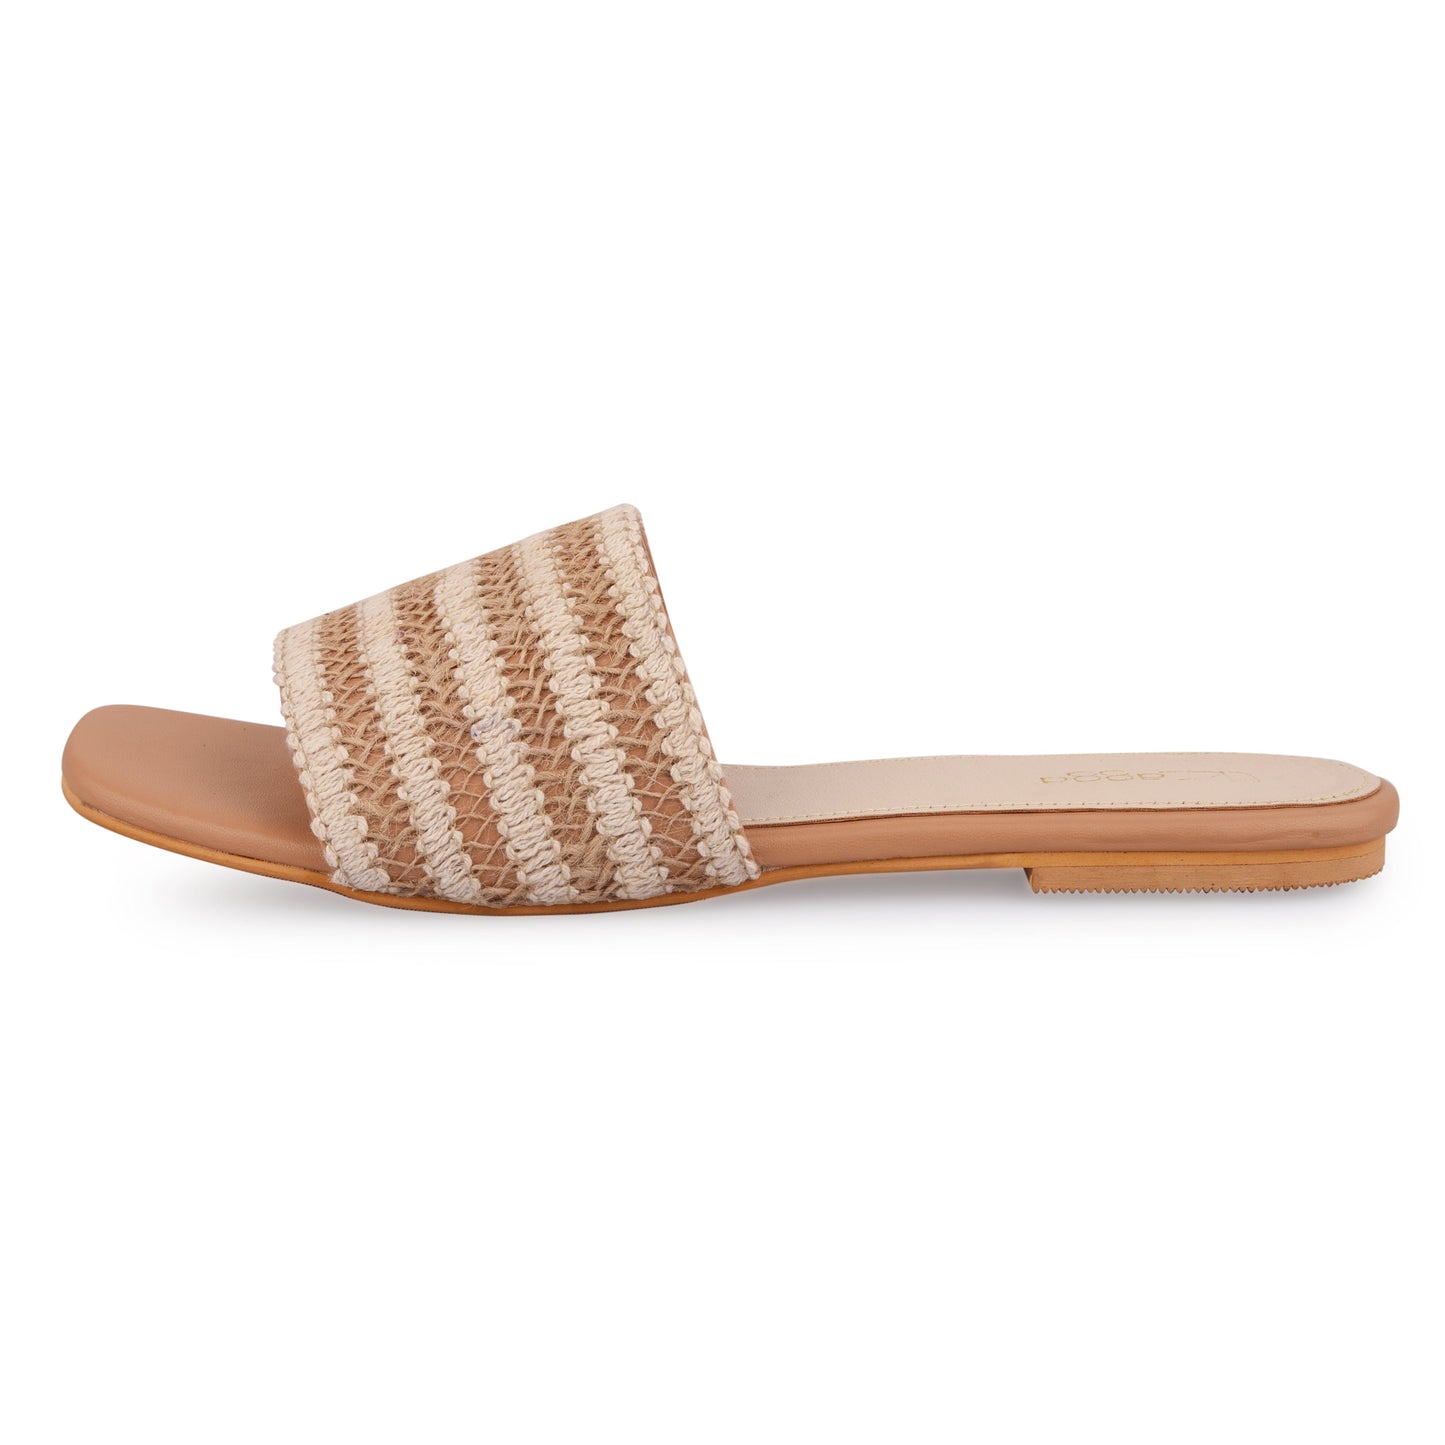 Weave Flat at Kamakhyaa by EK_agga. This item is Beige, Casual Wear, Flats, Not Priced, Open Toes, Patent leather, Regular Fit, Textured, Vegan, White